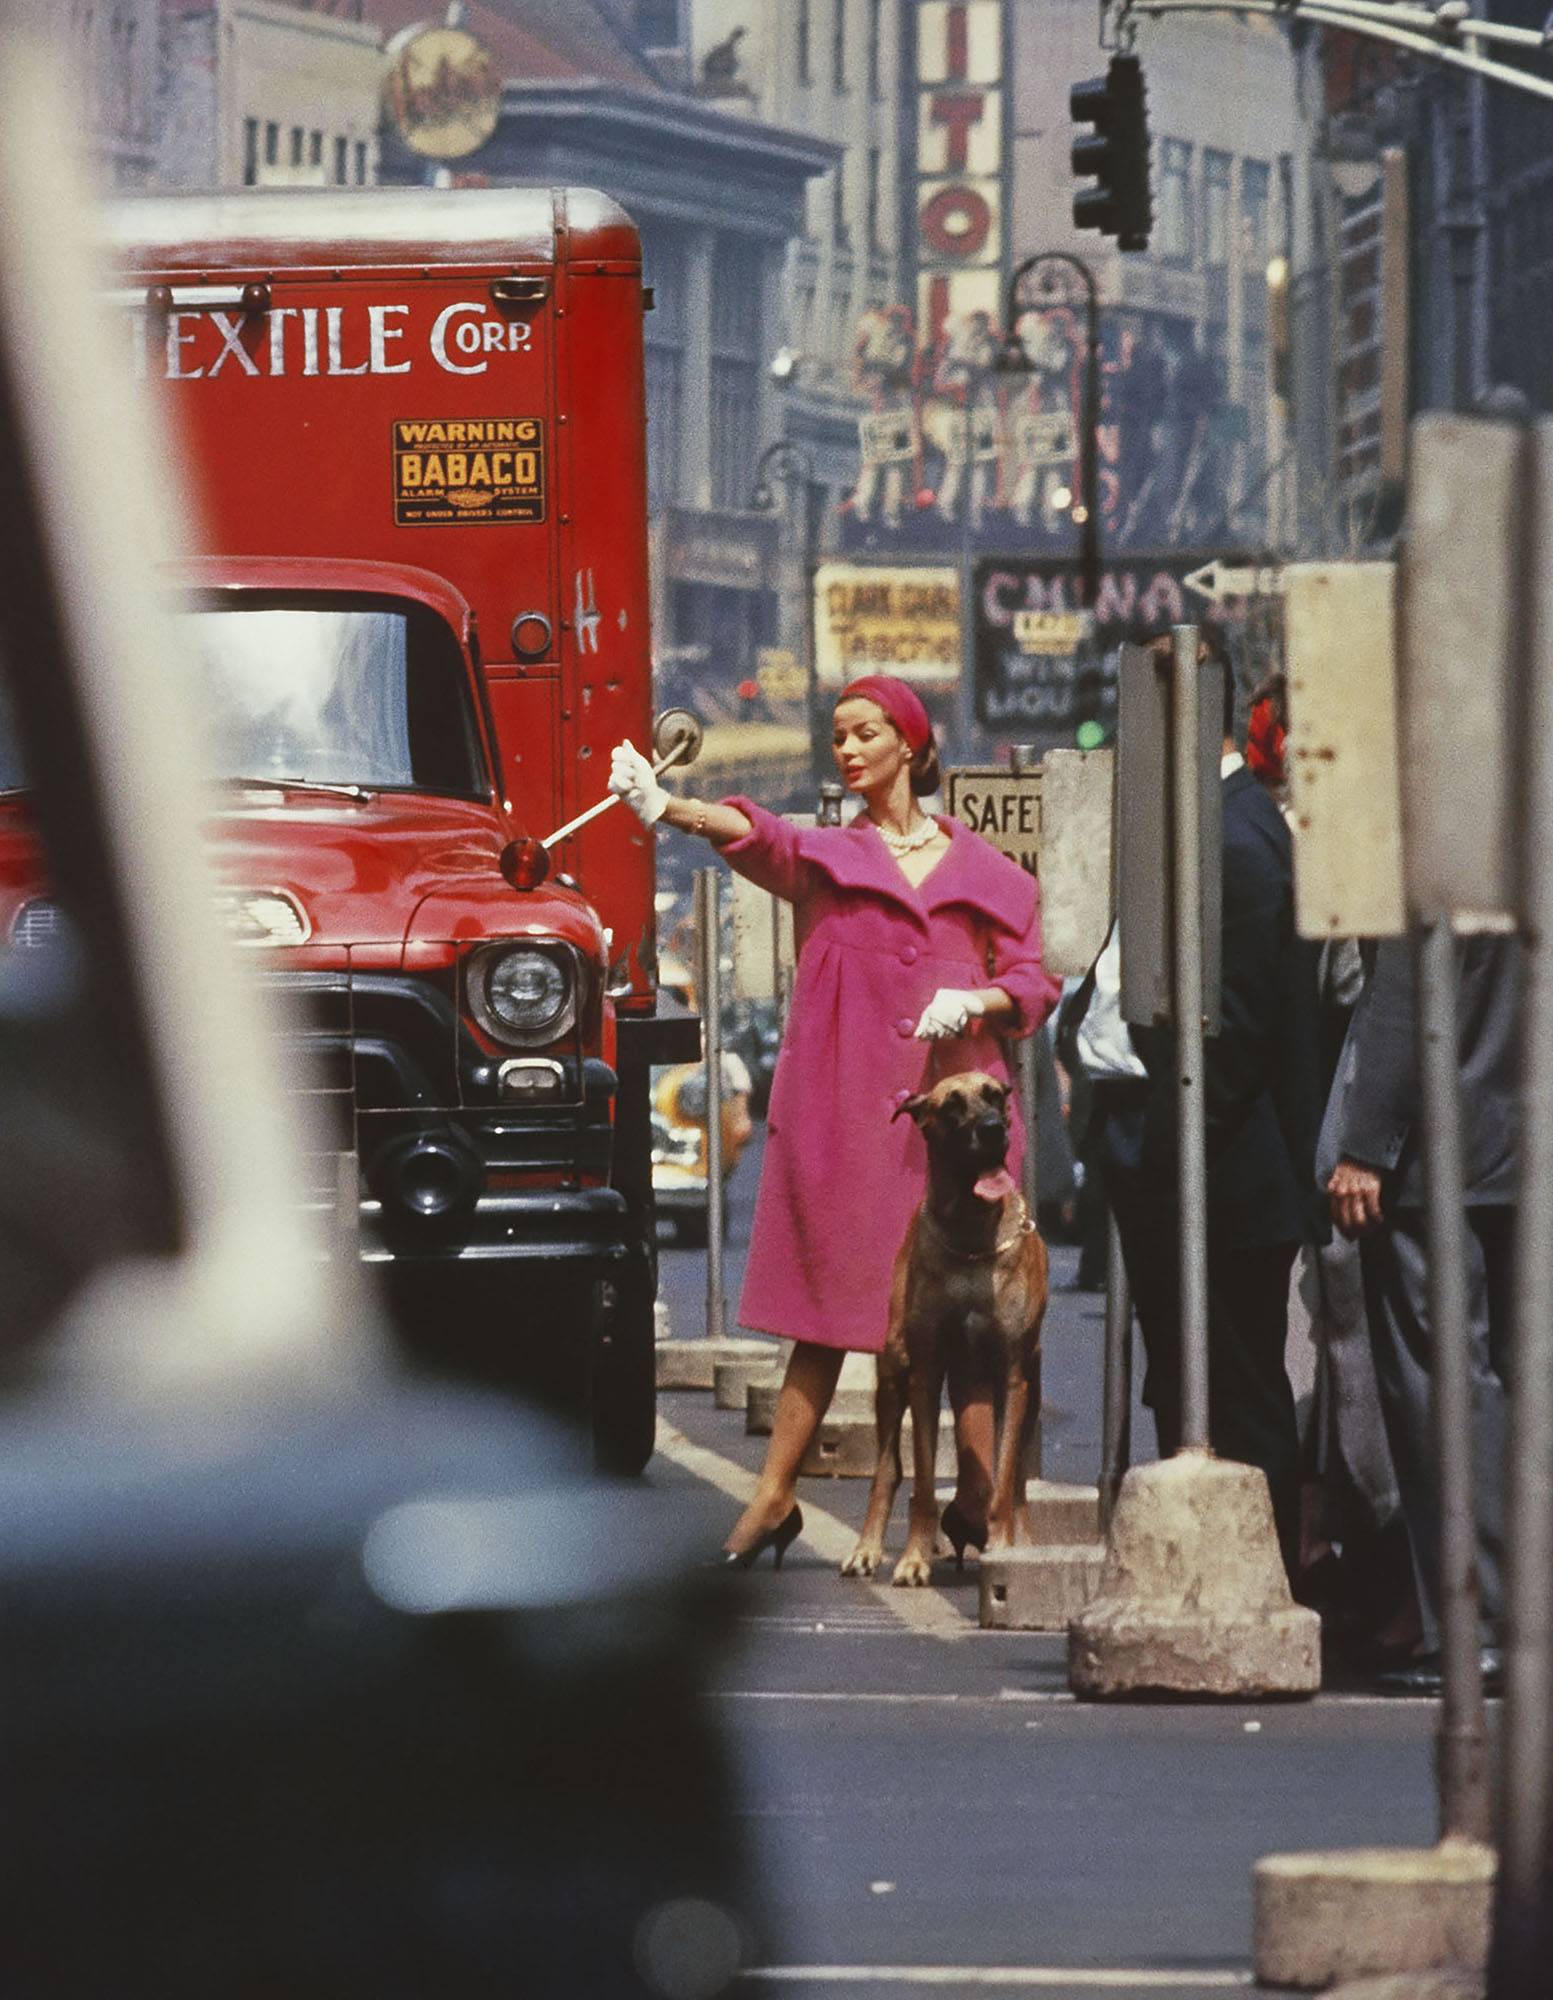 William Klein, Dolores wants a cab, New York, (Vogue), 1958, polka galerie / Fot. Polka Galerie